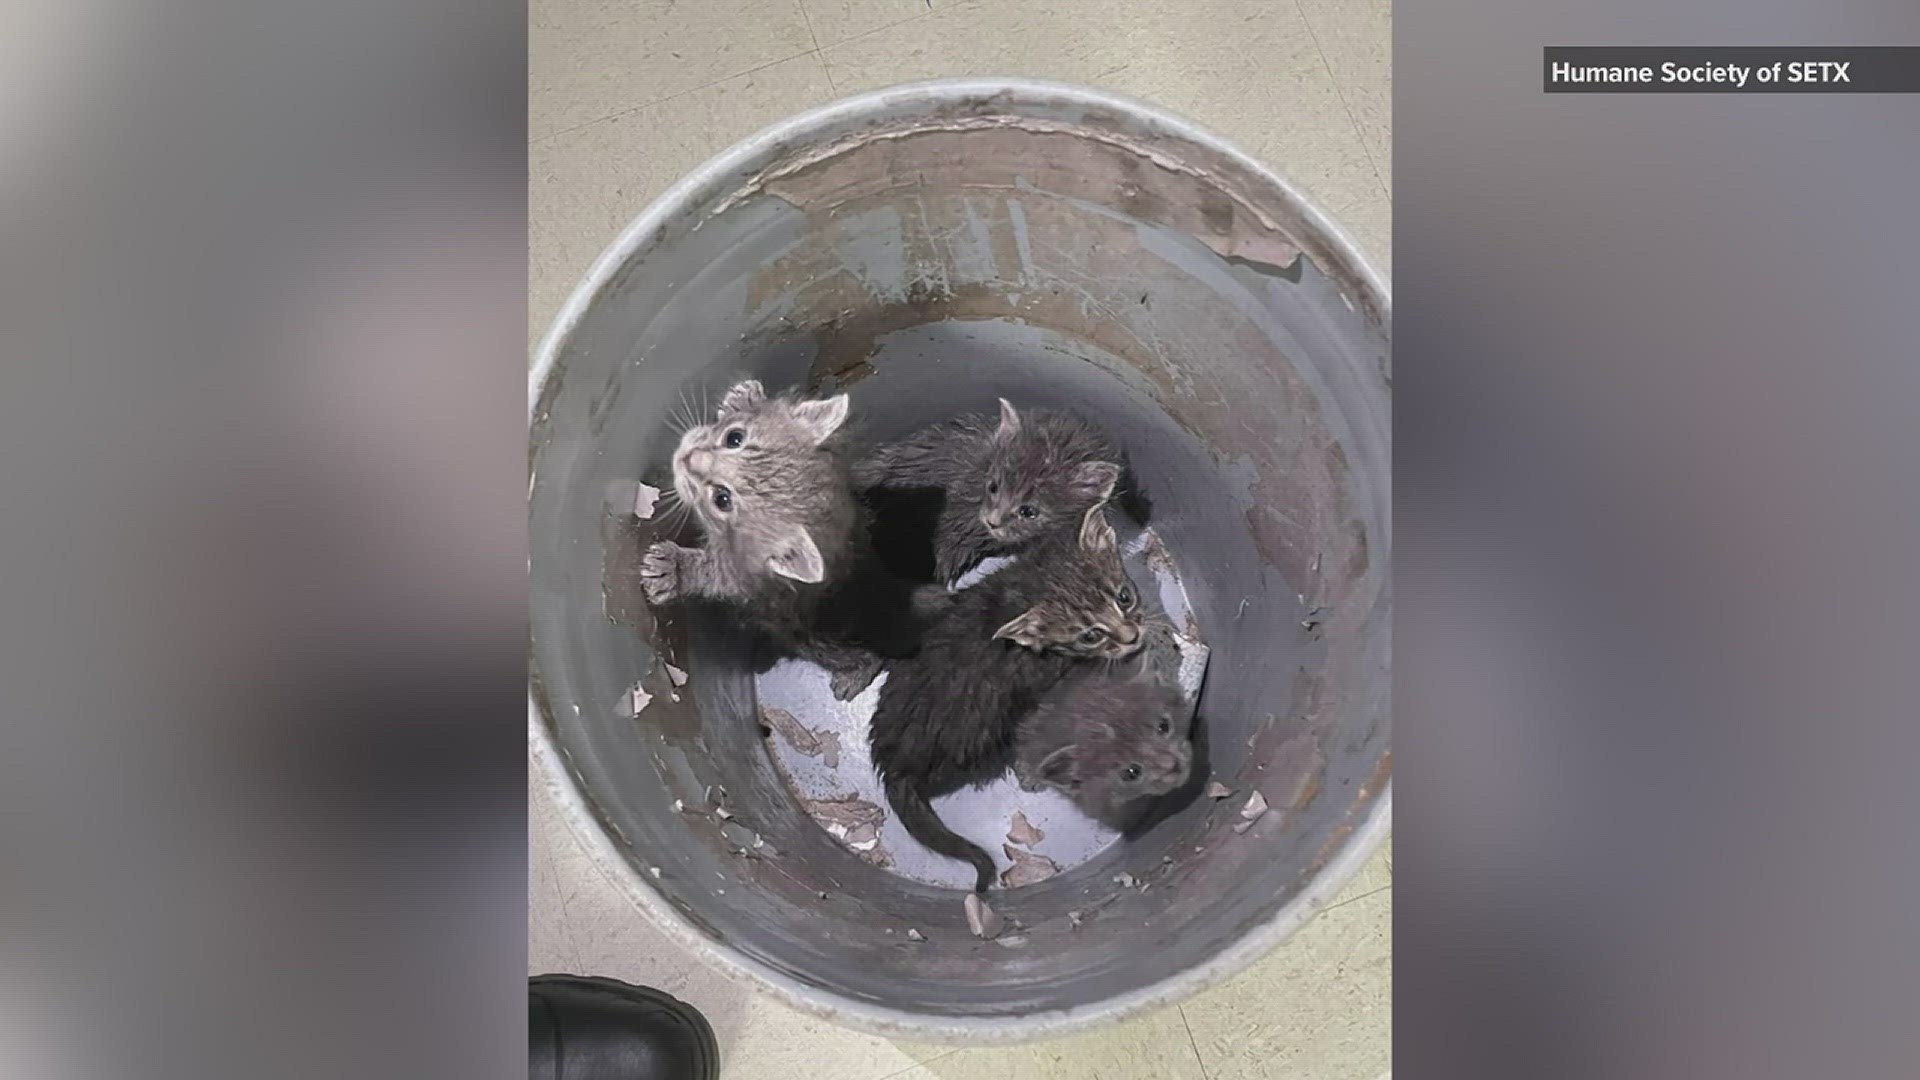 On Wednesday, April 3, Beaumont Animal Care employees arrived at work to find six kittens left in a bucket outside in the chilly morning air.